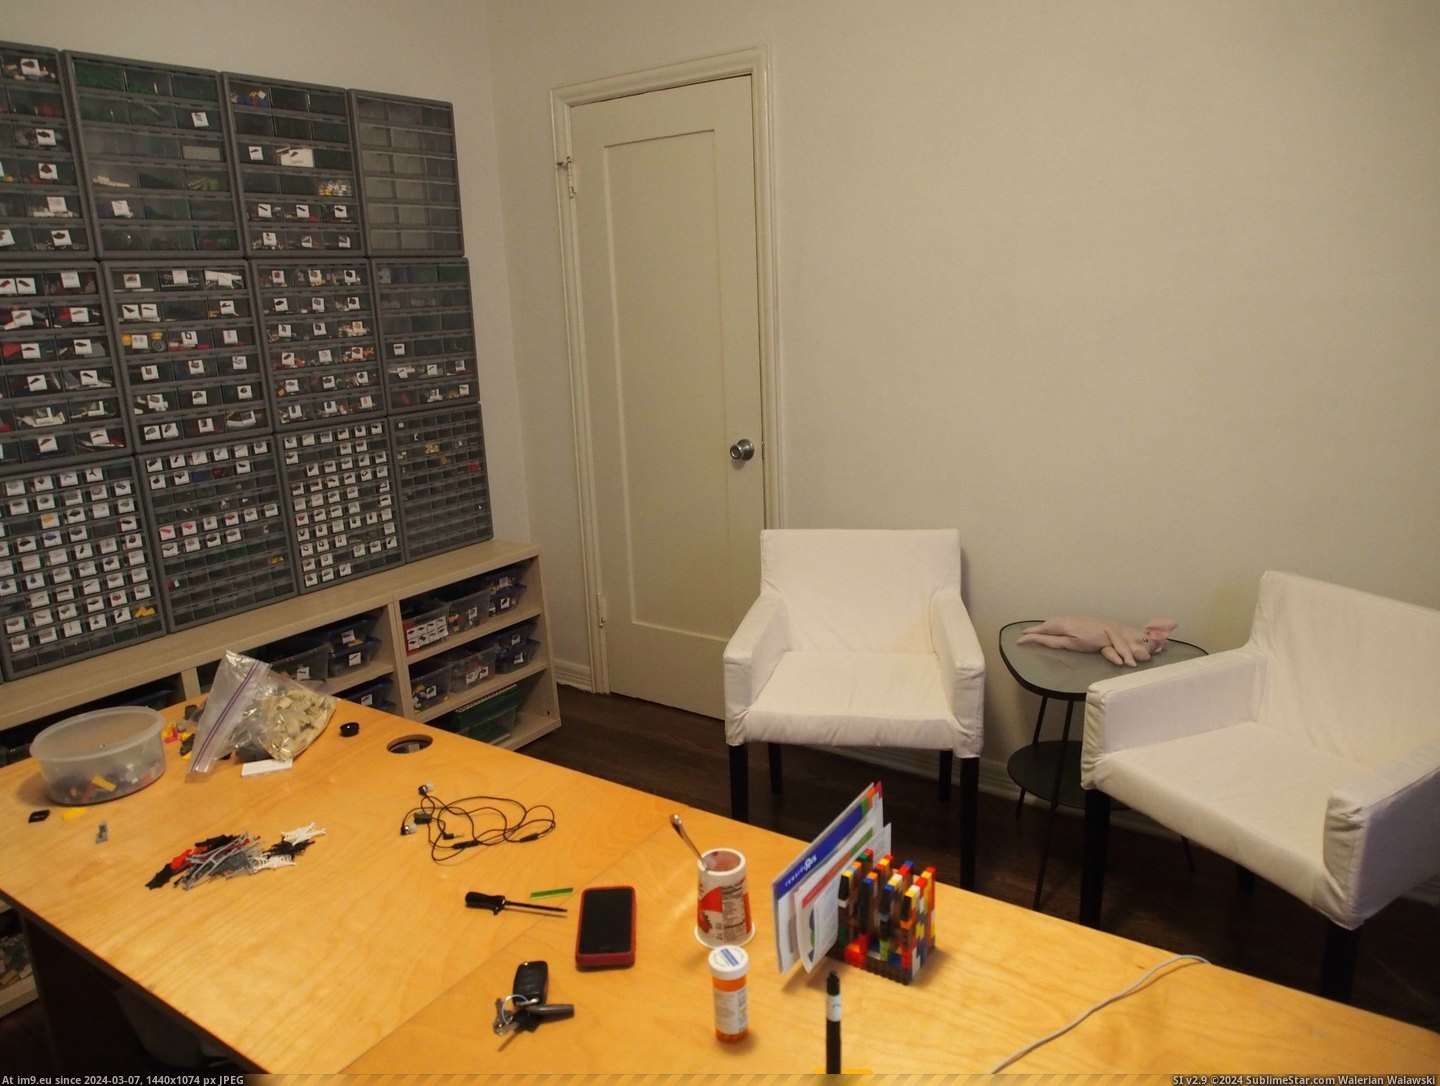 #Room #Lego #Finished #Finally [Pics] My Lego room is finally finished! 1 Pic. (Изображение из альбом My r/PICS favs))